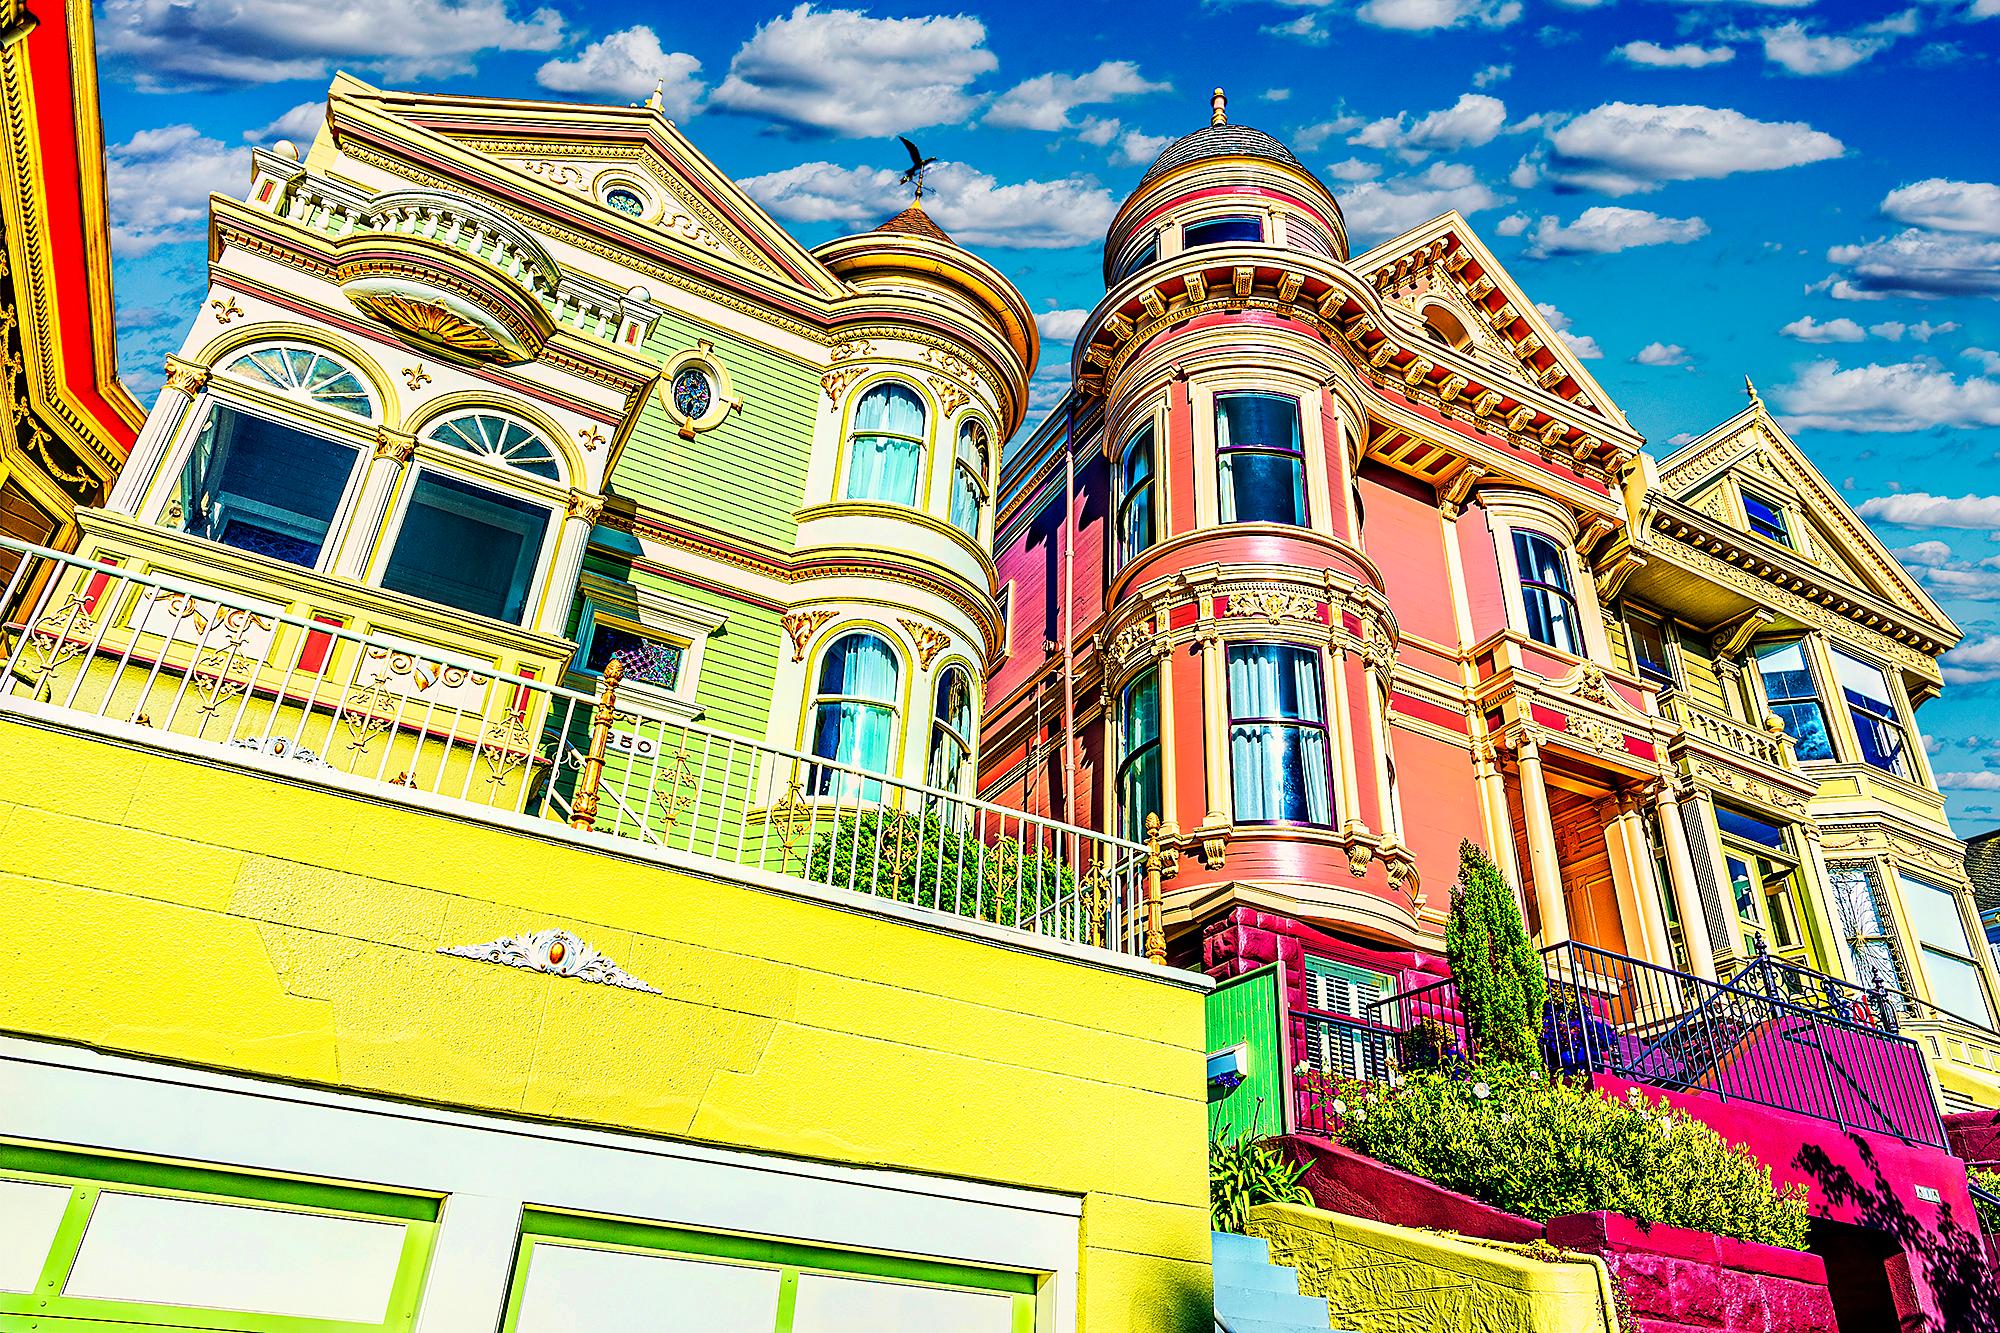 Mitchell Funk Abstract Photograph - Colorful Victorians in Alamo Square, San Francisco, Architectural Photography